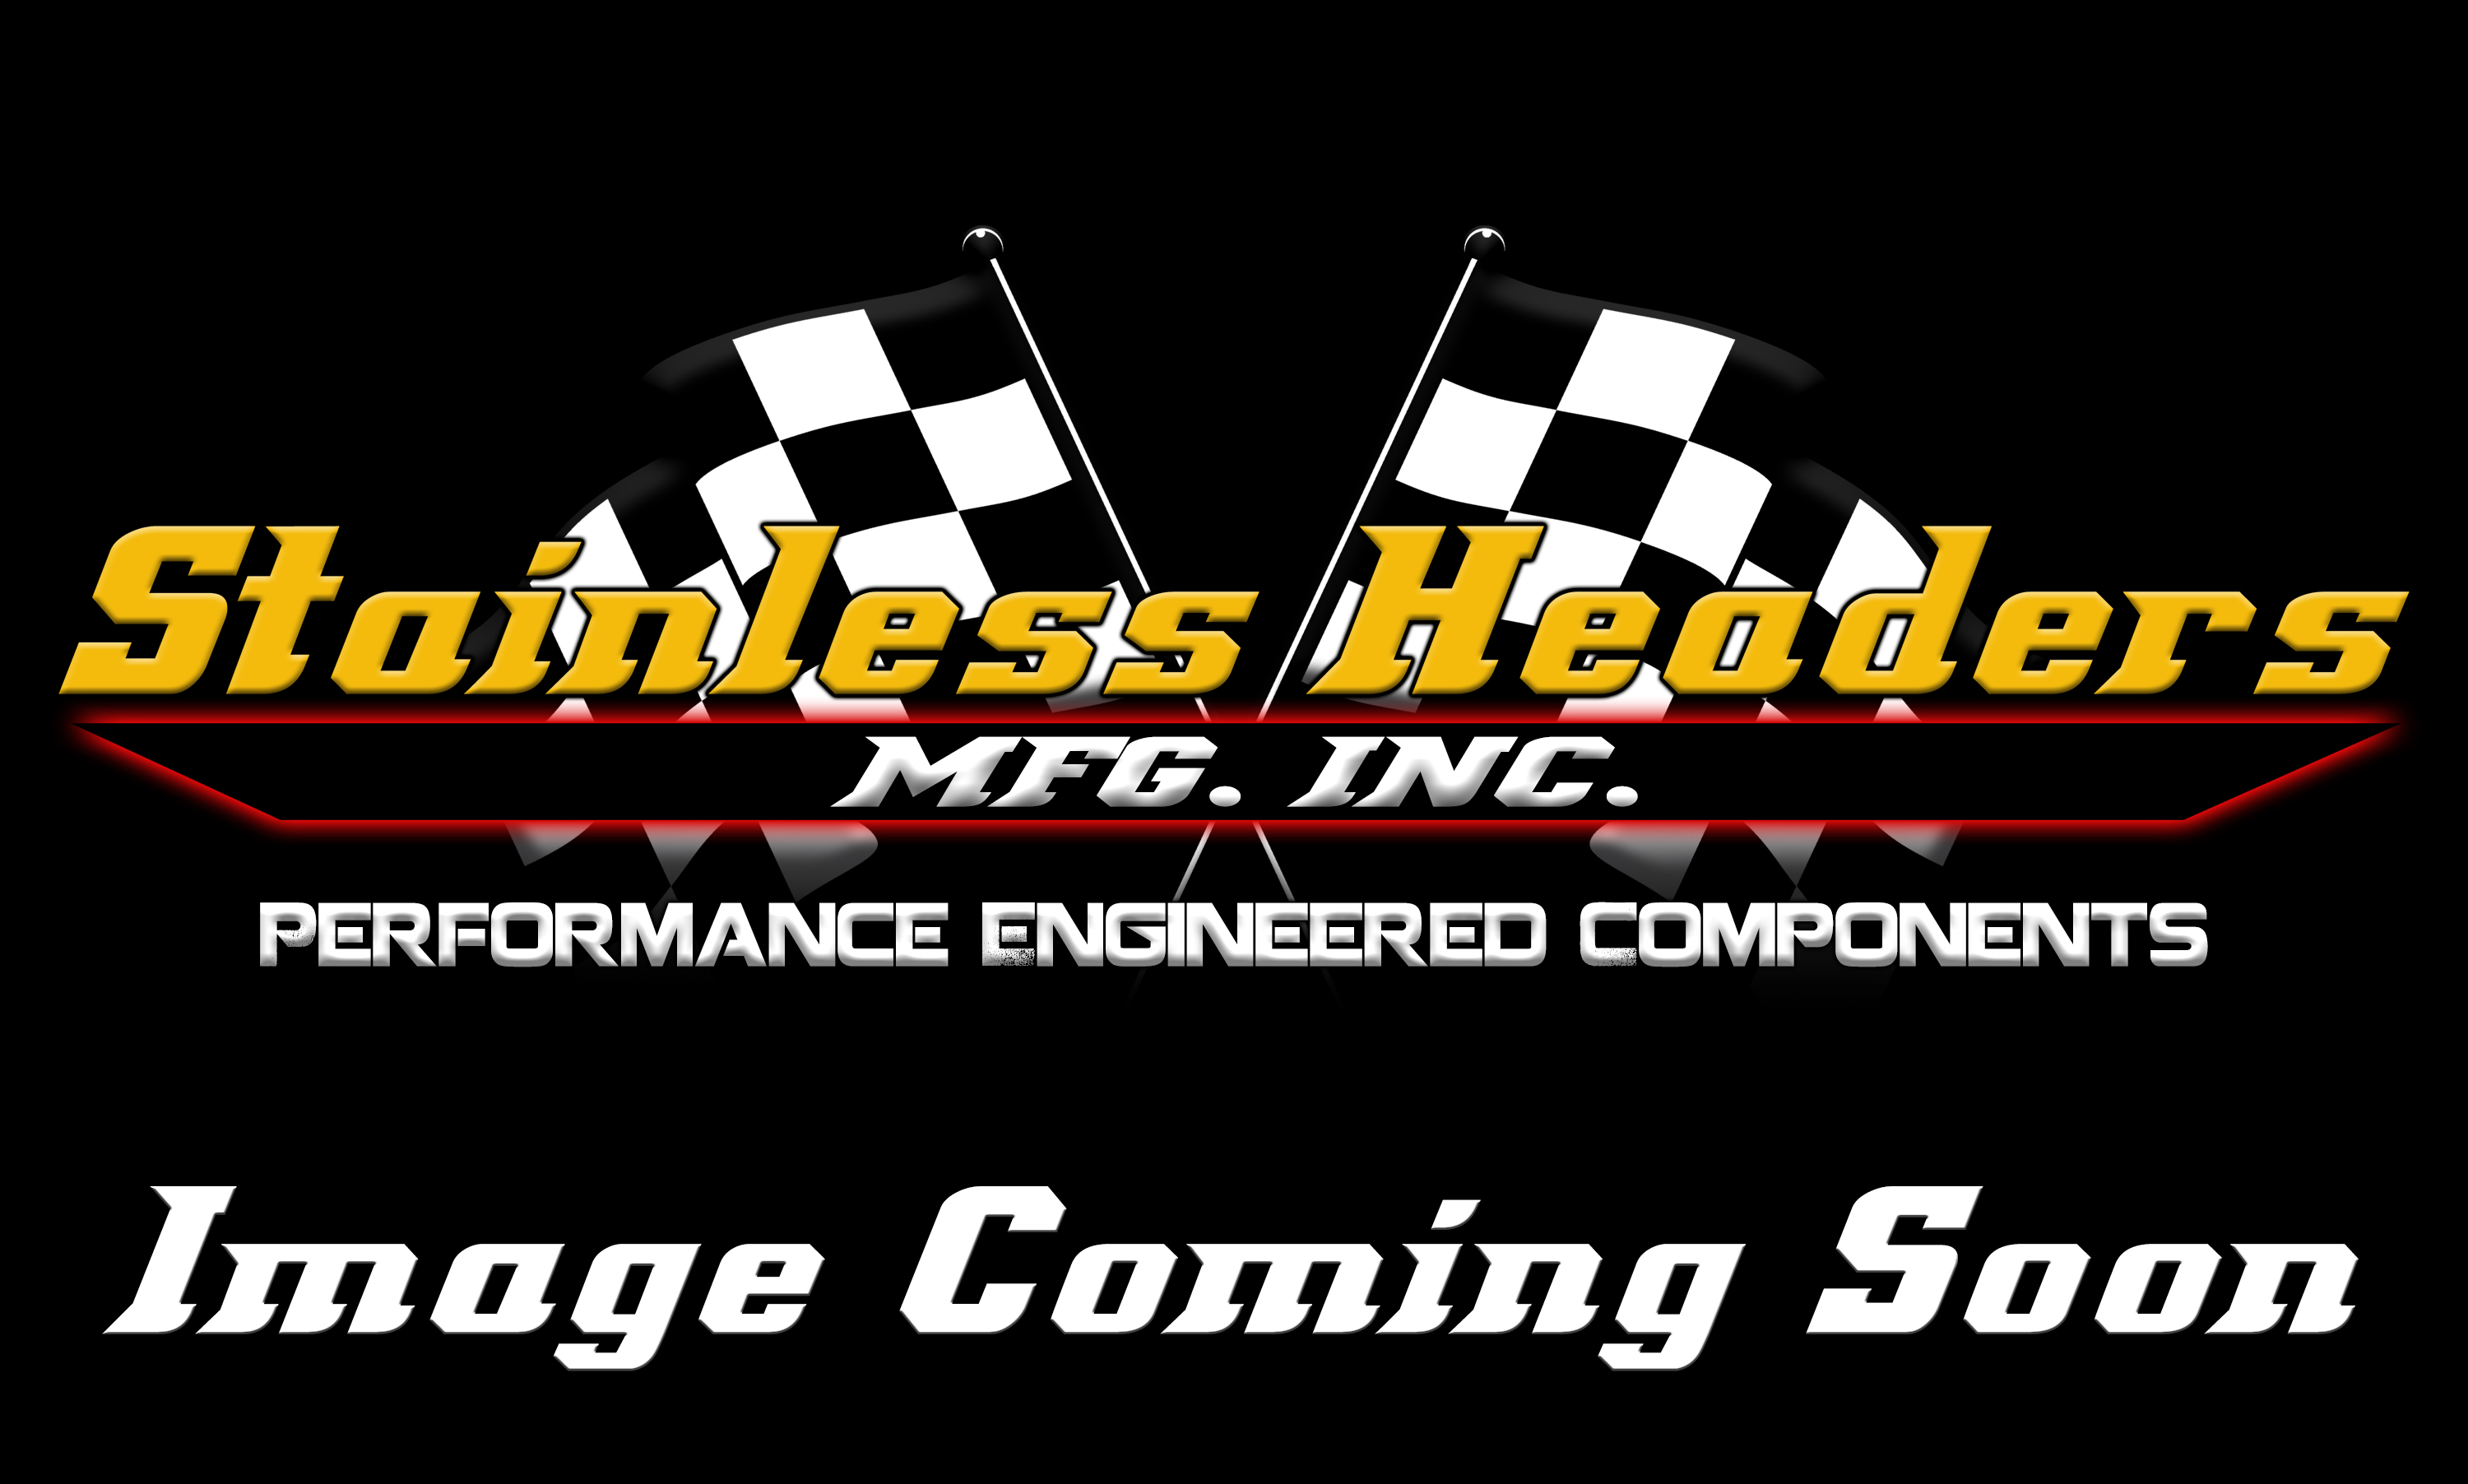 CompTurbo Technologies - CTR4202R-7290 Mid Frame 360 Journal Bearing Turbocharger (1250 HP)